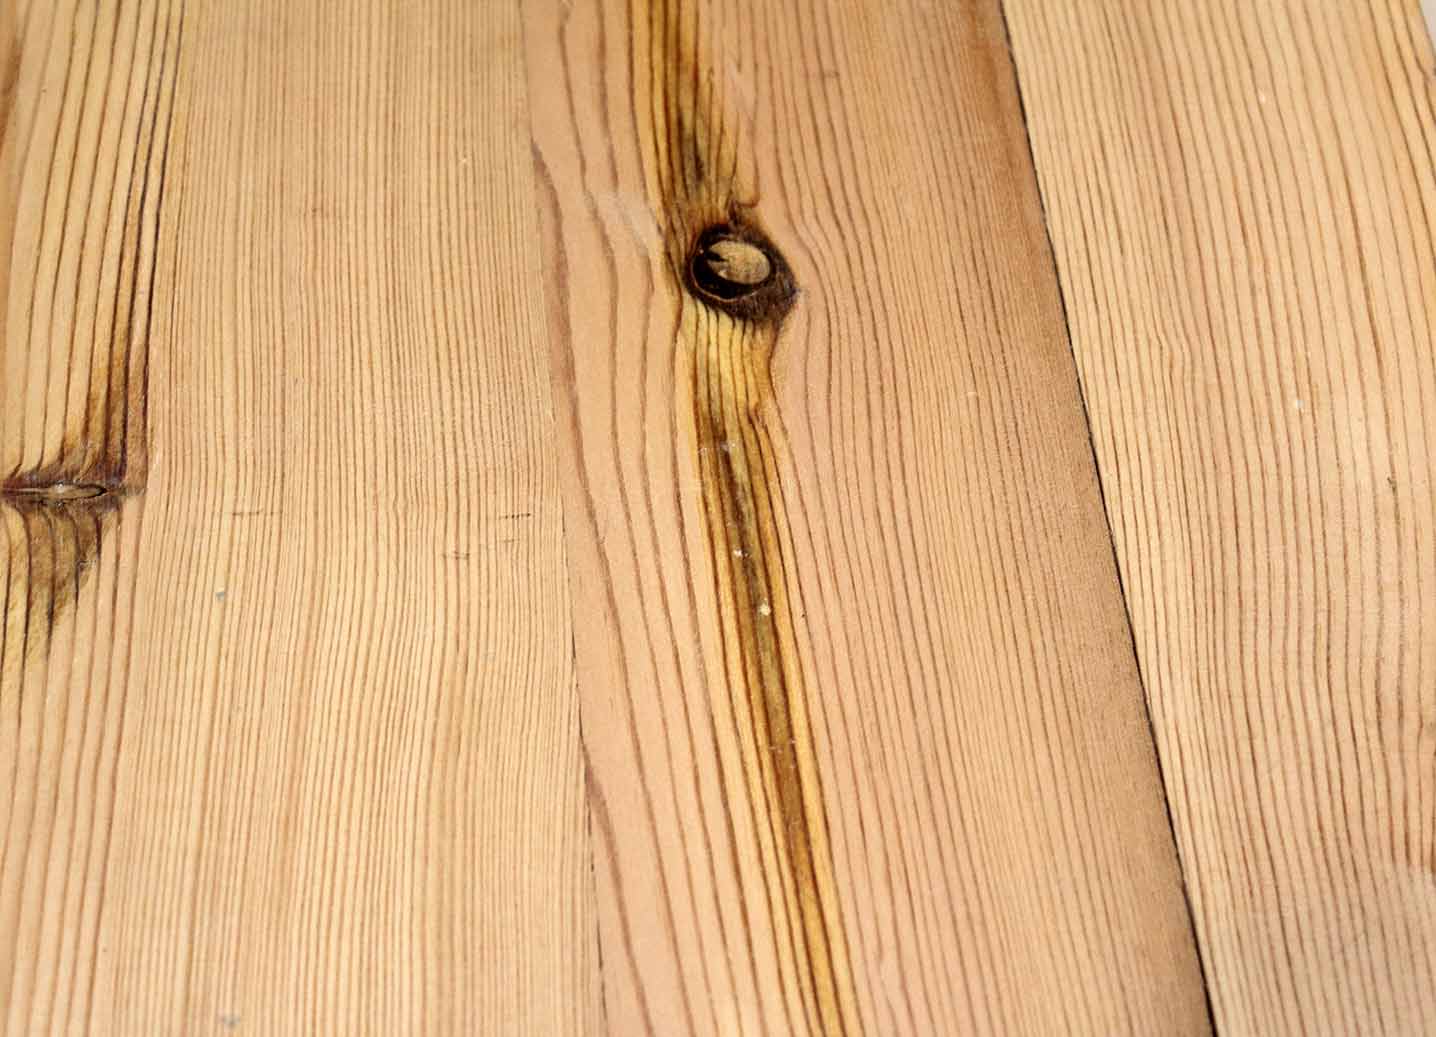 close up of yellow pine reclaimed flooring. Knots shown throughout and grain patterns in the wood are prominent.